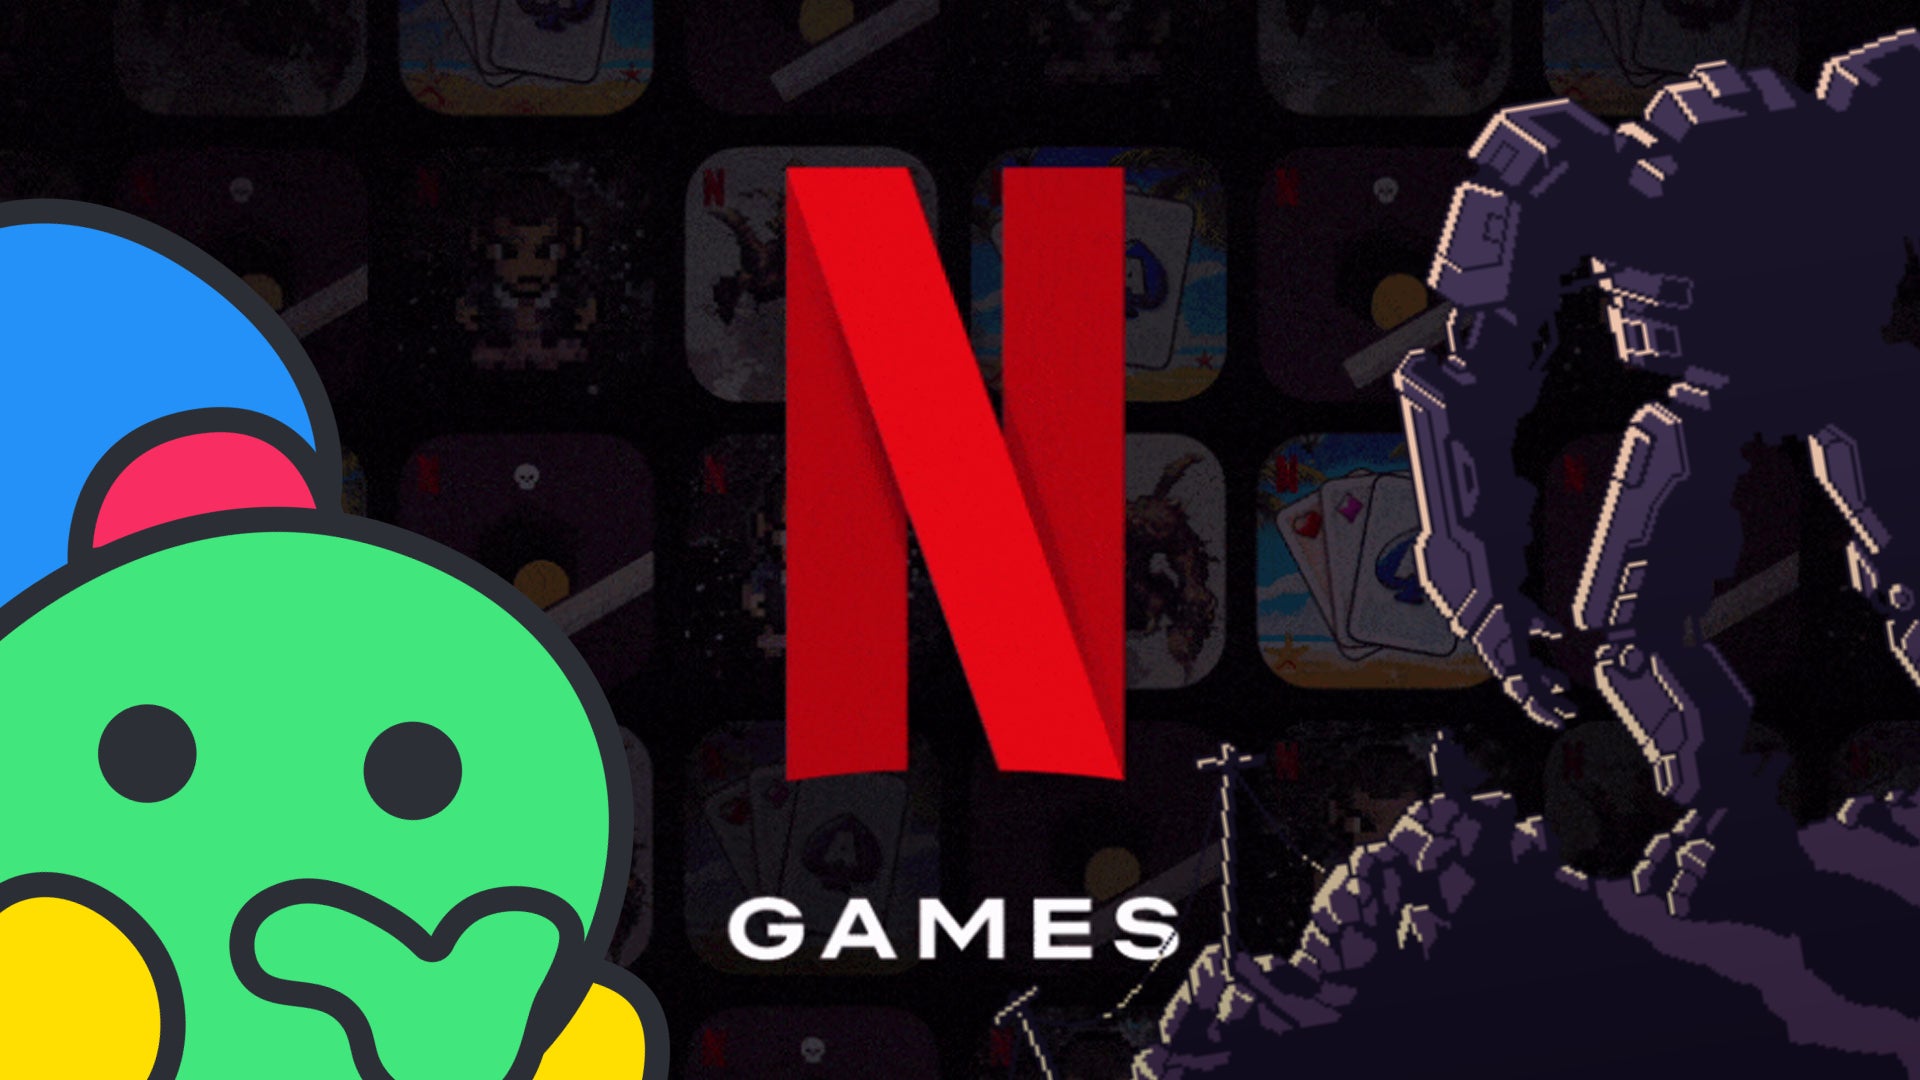 Attention all Netflix subscribers: Please, use your excellent free games before they’re taken away from you